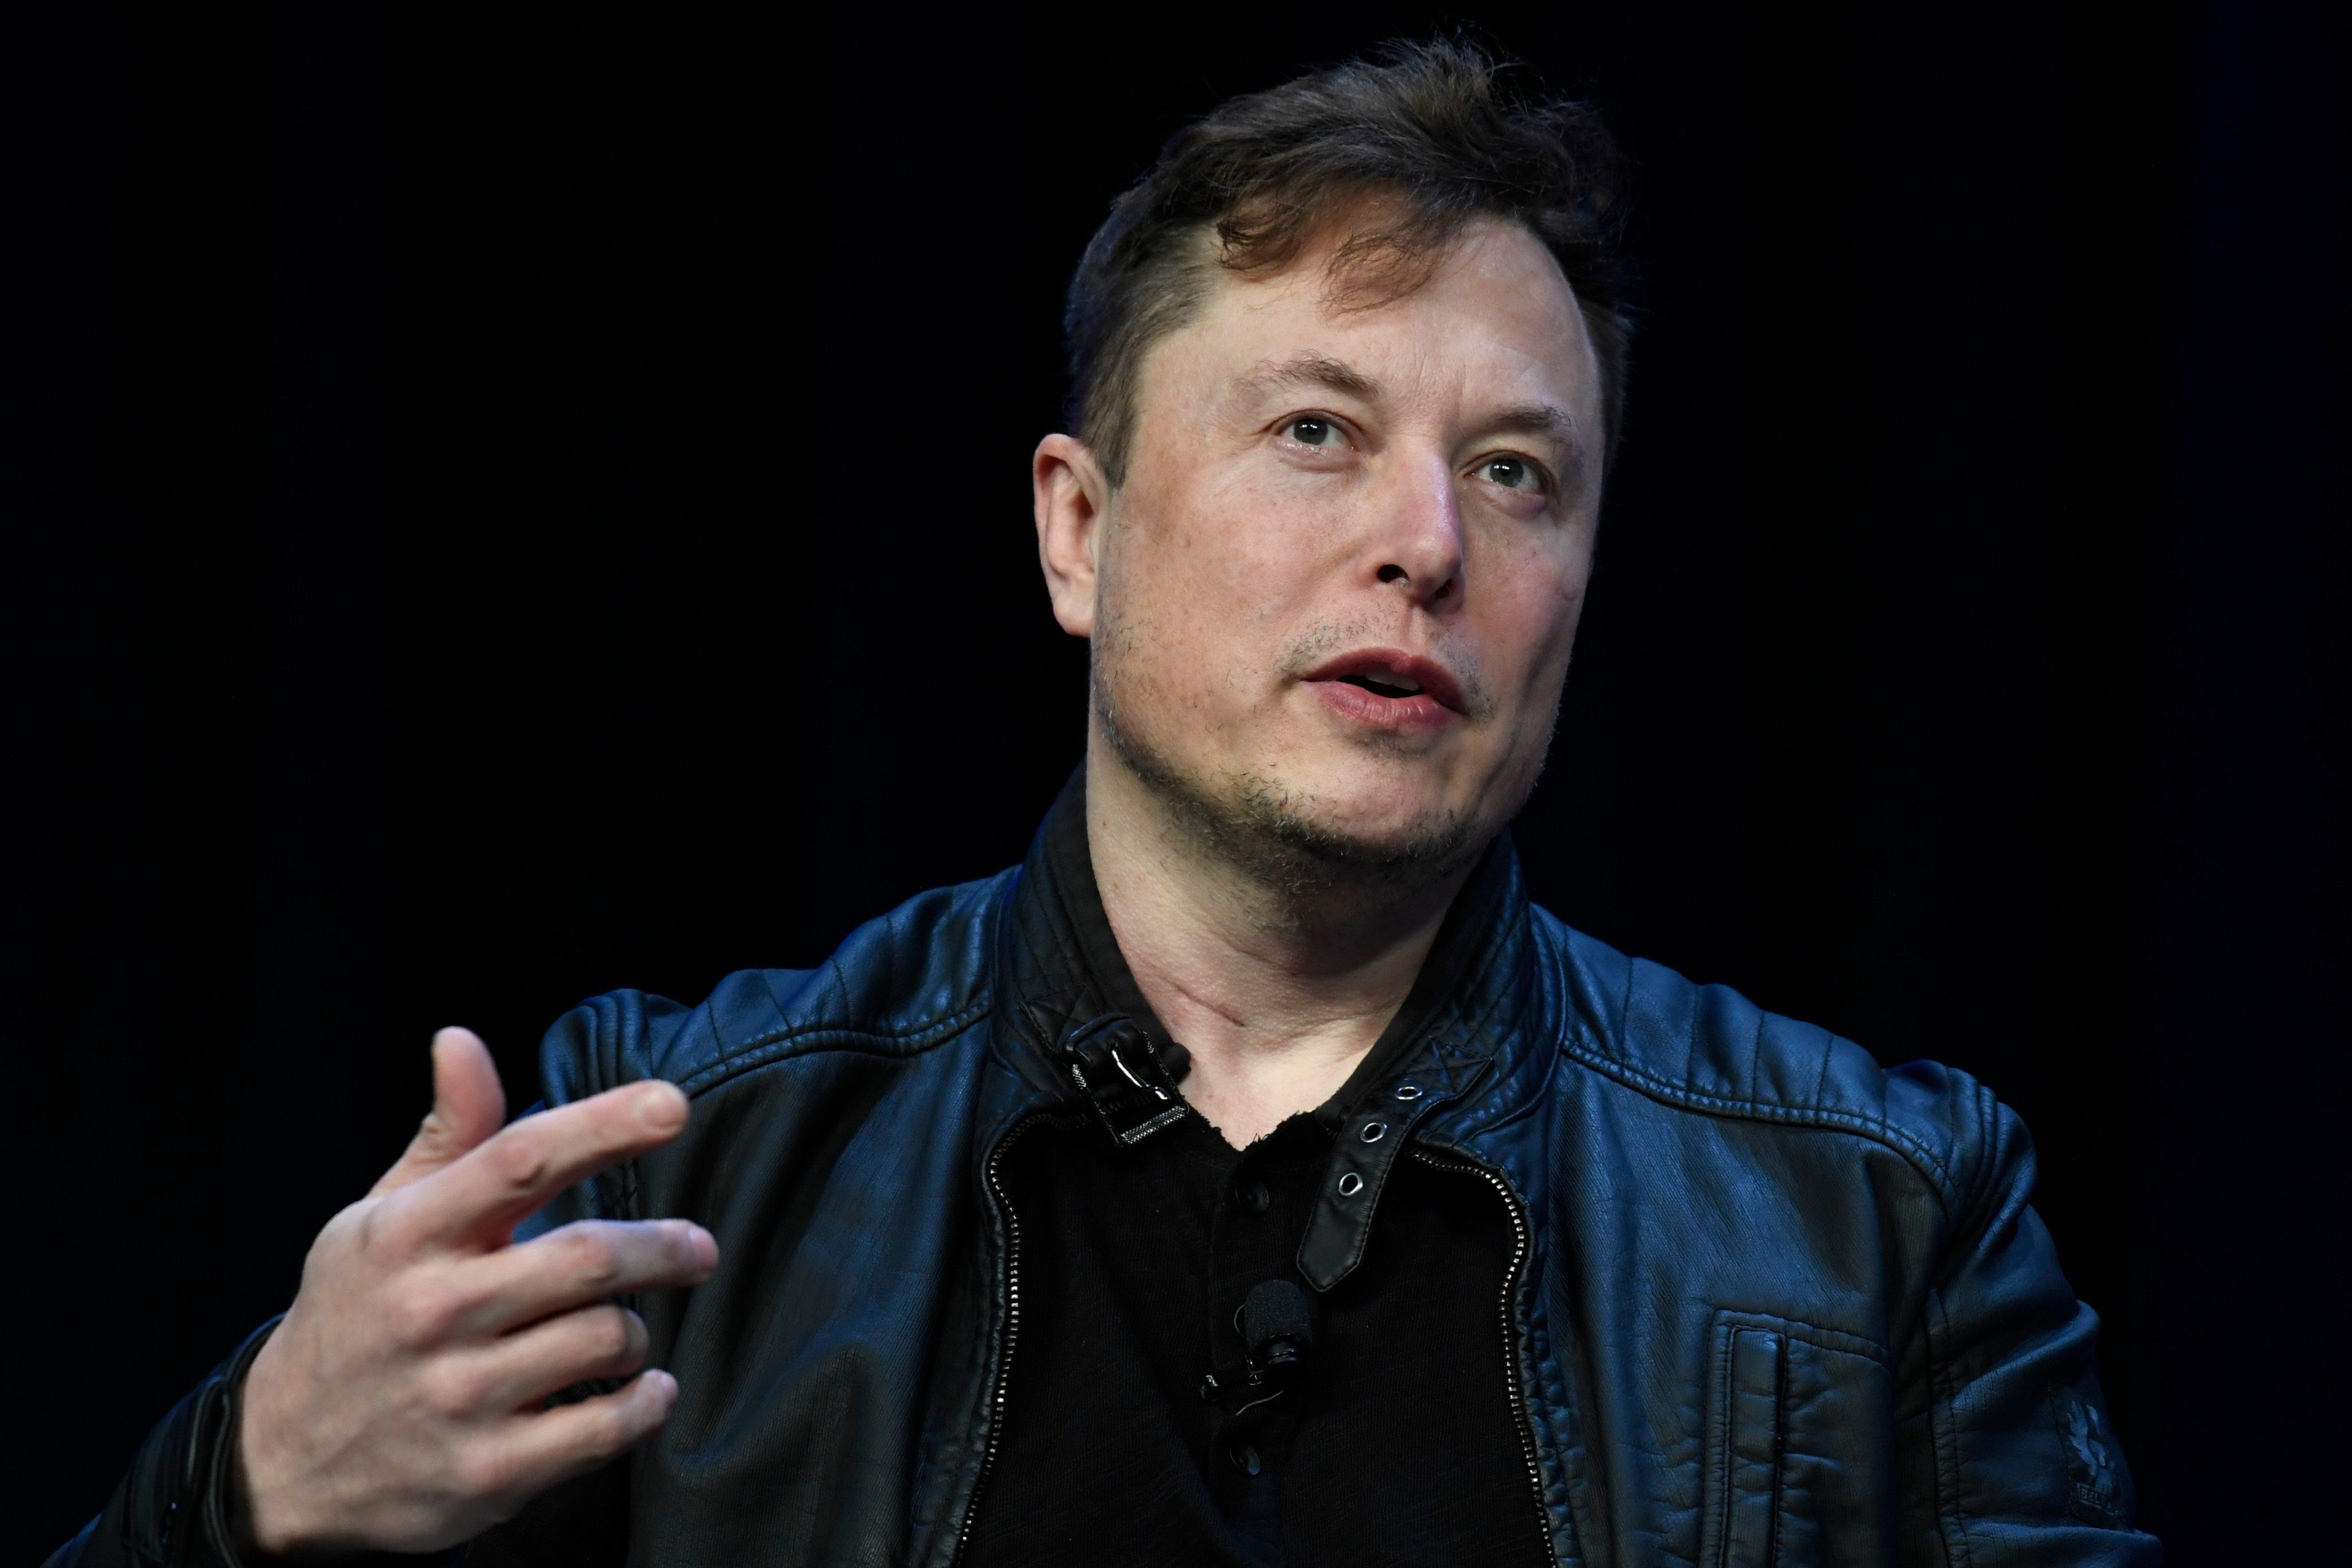 Elon Musk is praising Nvidia CEO Jenson Huang for his work ethic. Photo: AP/File